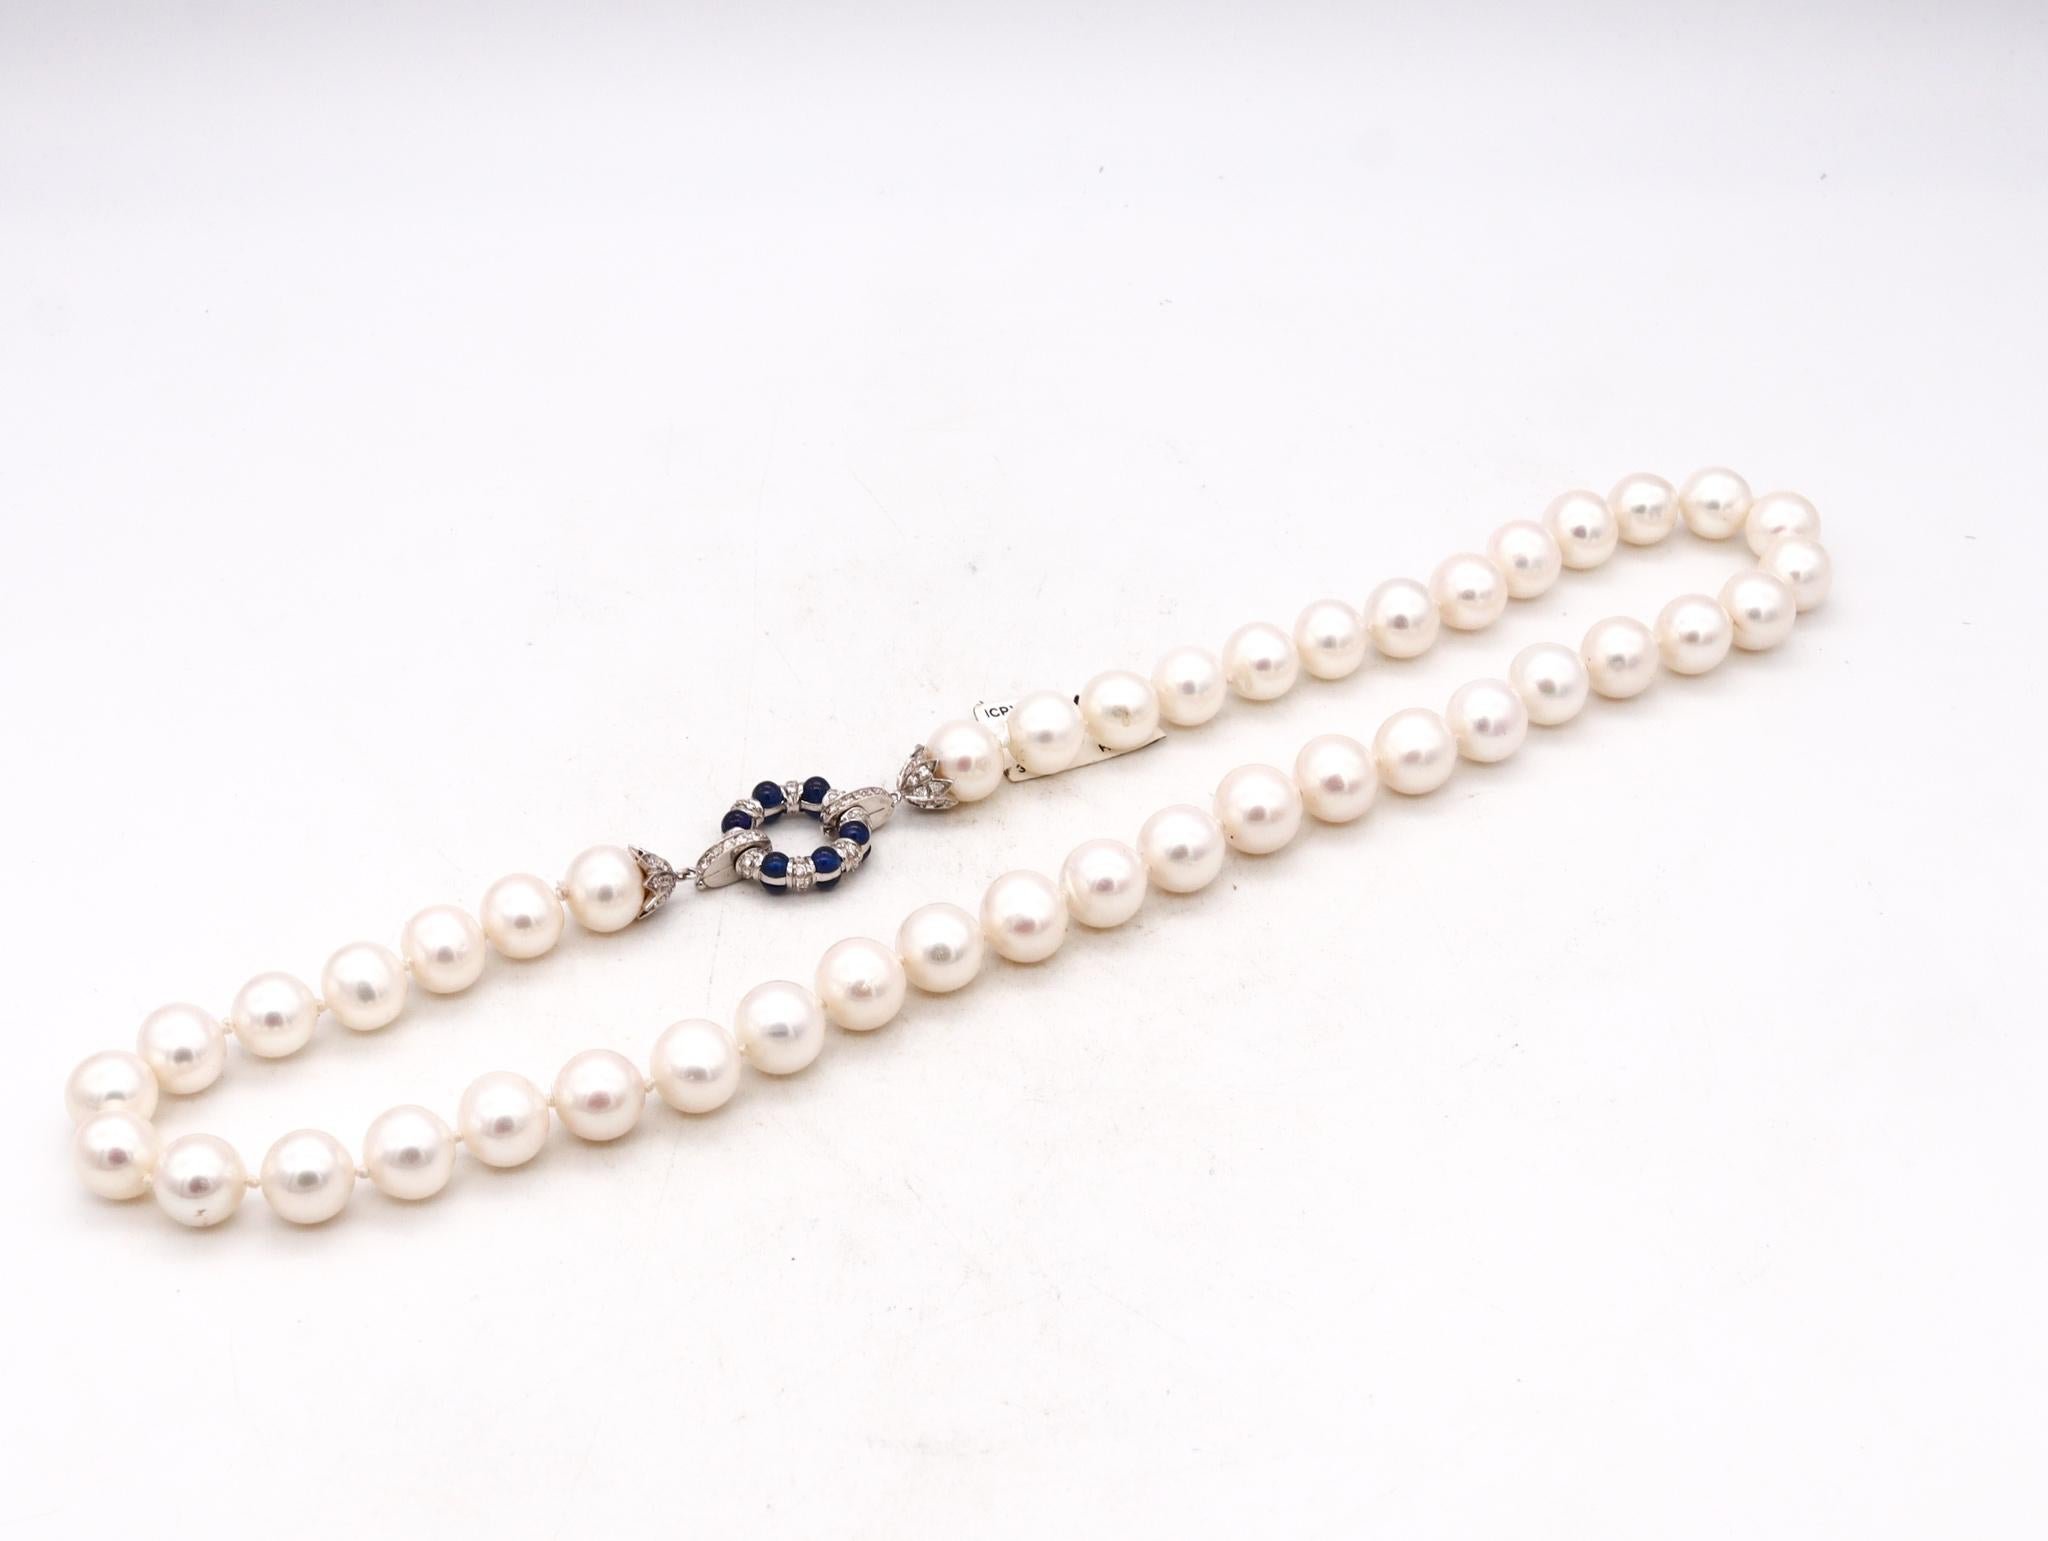 Favero Italy 18Kt Gold Necklace Akoya Pearls and 4.74 Cts in Sapphire Diamonds 1